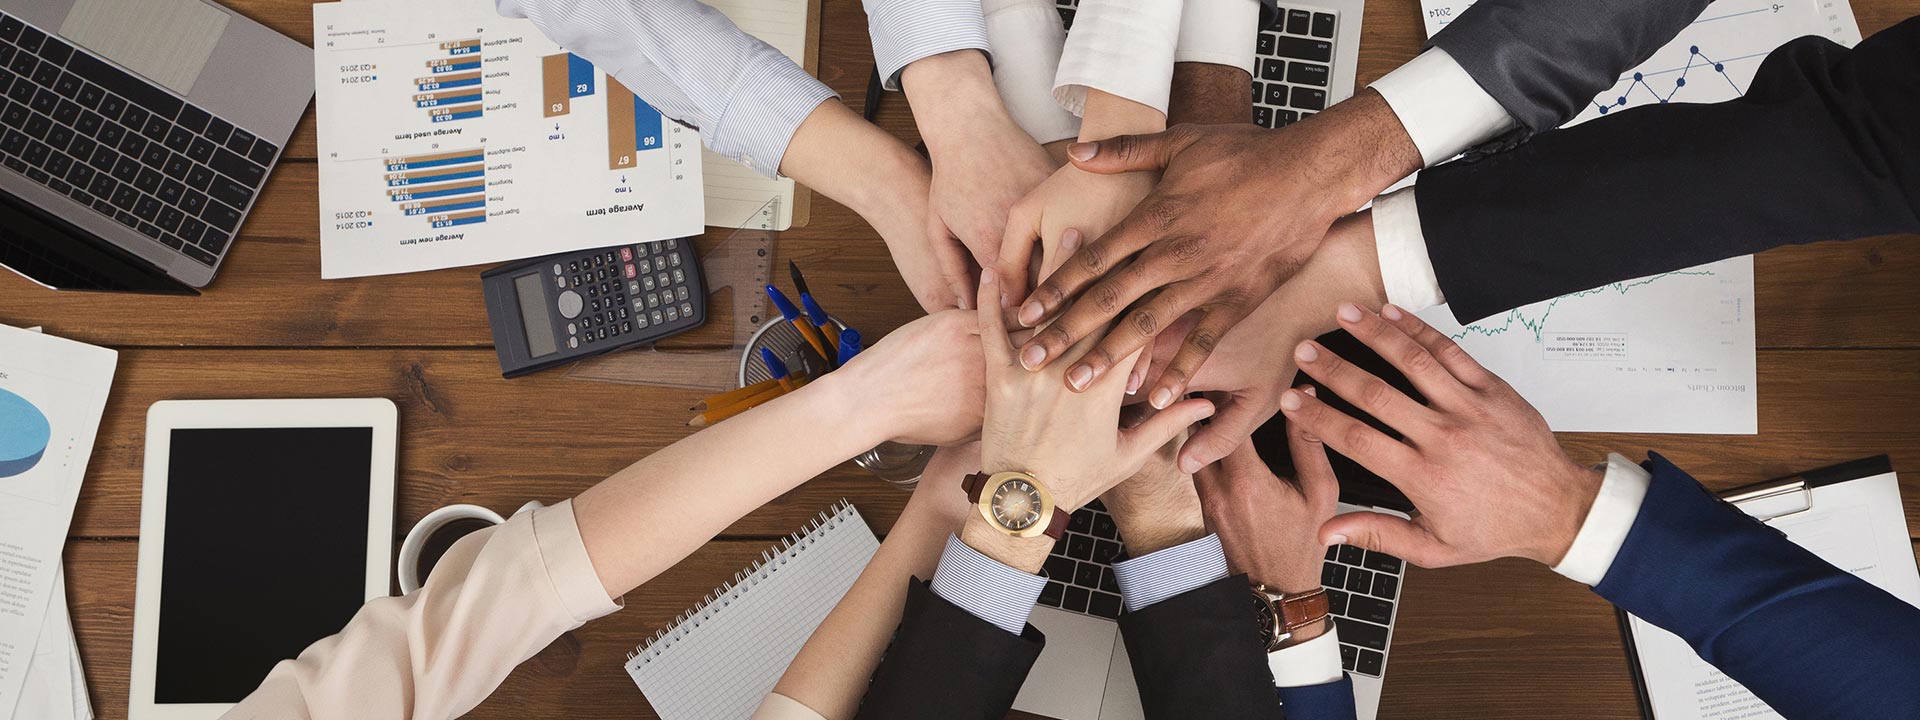 How Diversity Boosts Employee Engagement